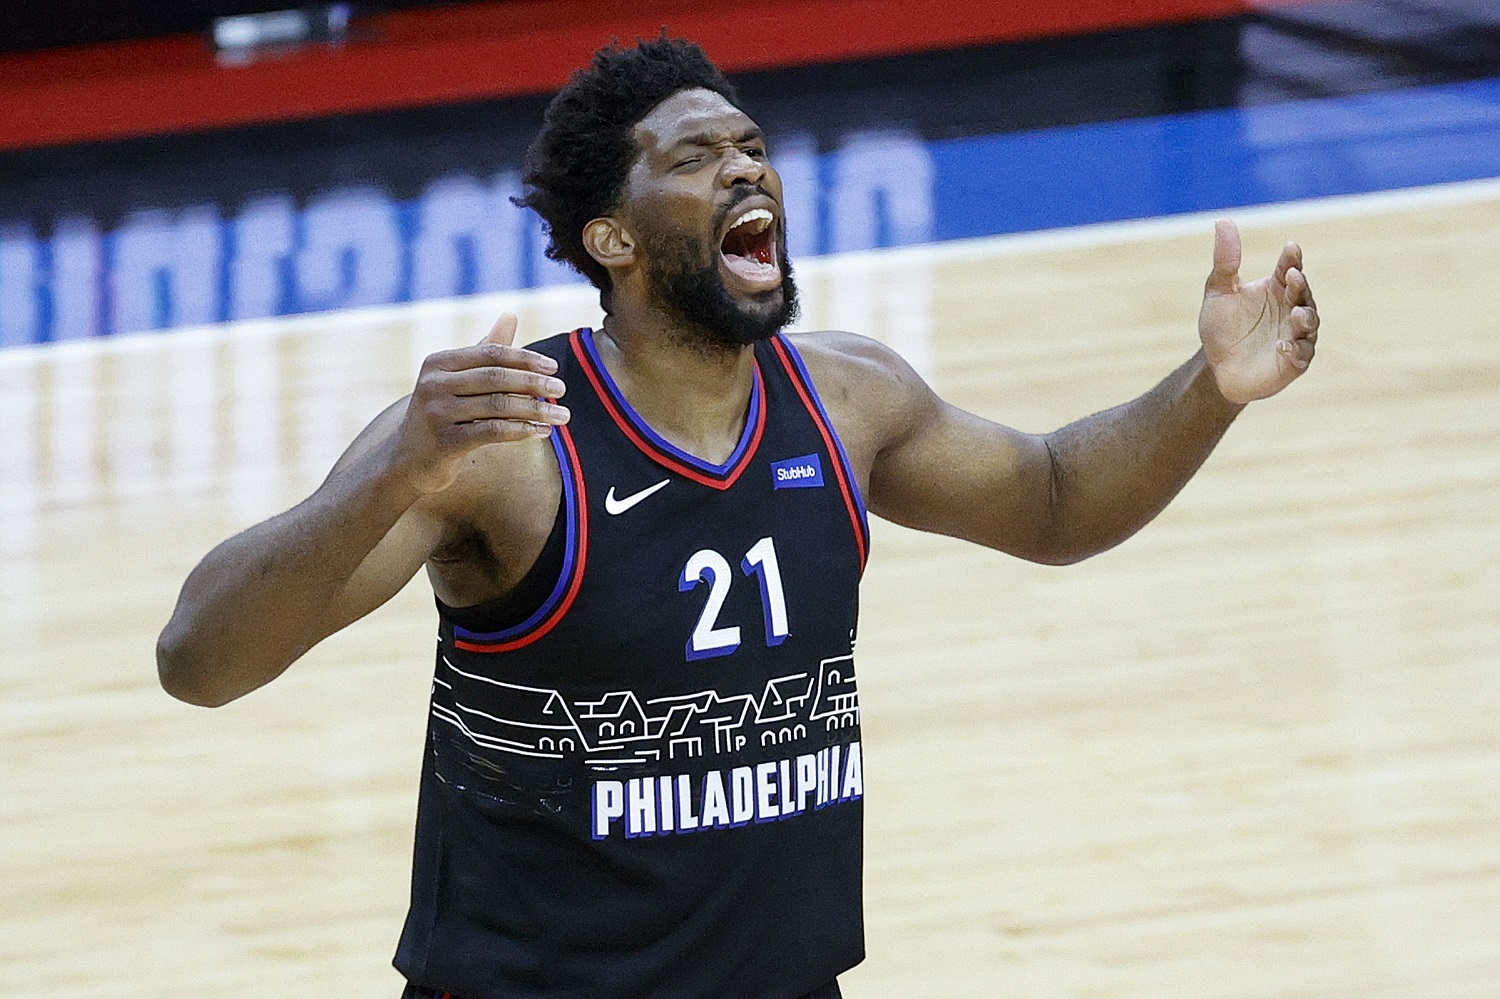 Joel Embiid of the Philadelphia 76ers celebrates against the Washington Wizards during Game 2 of the NBA Eastern Conference quarterfinals.